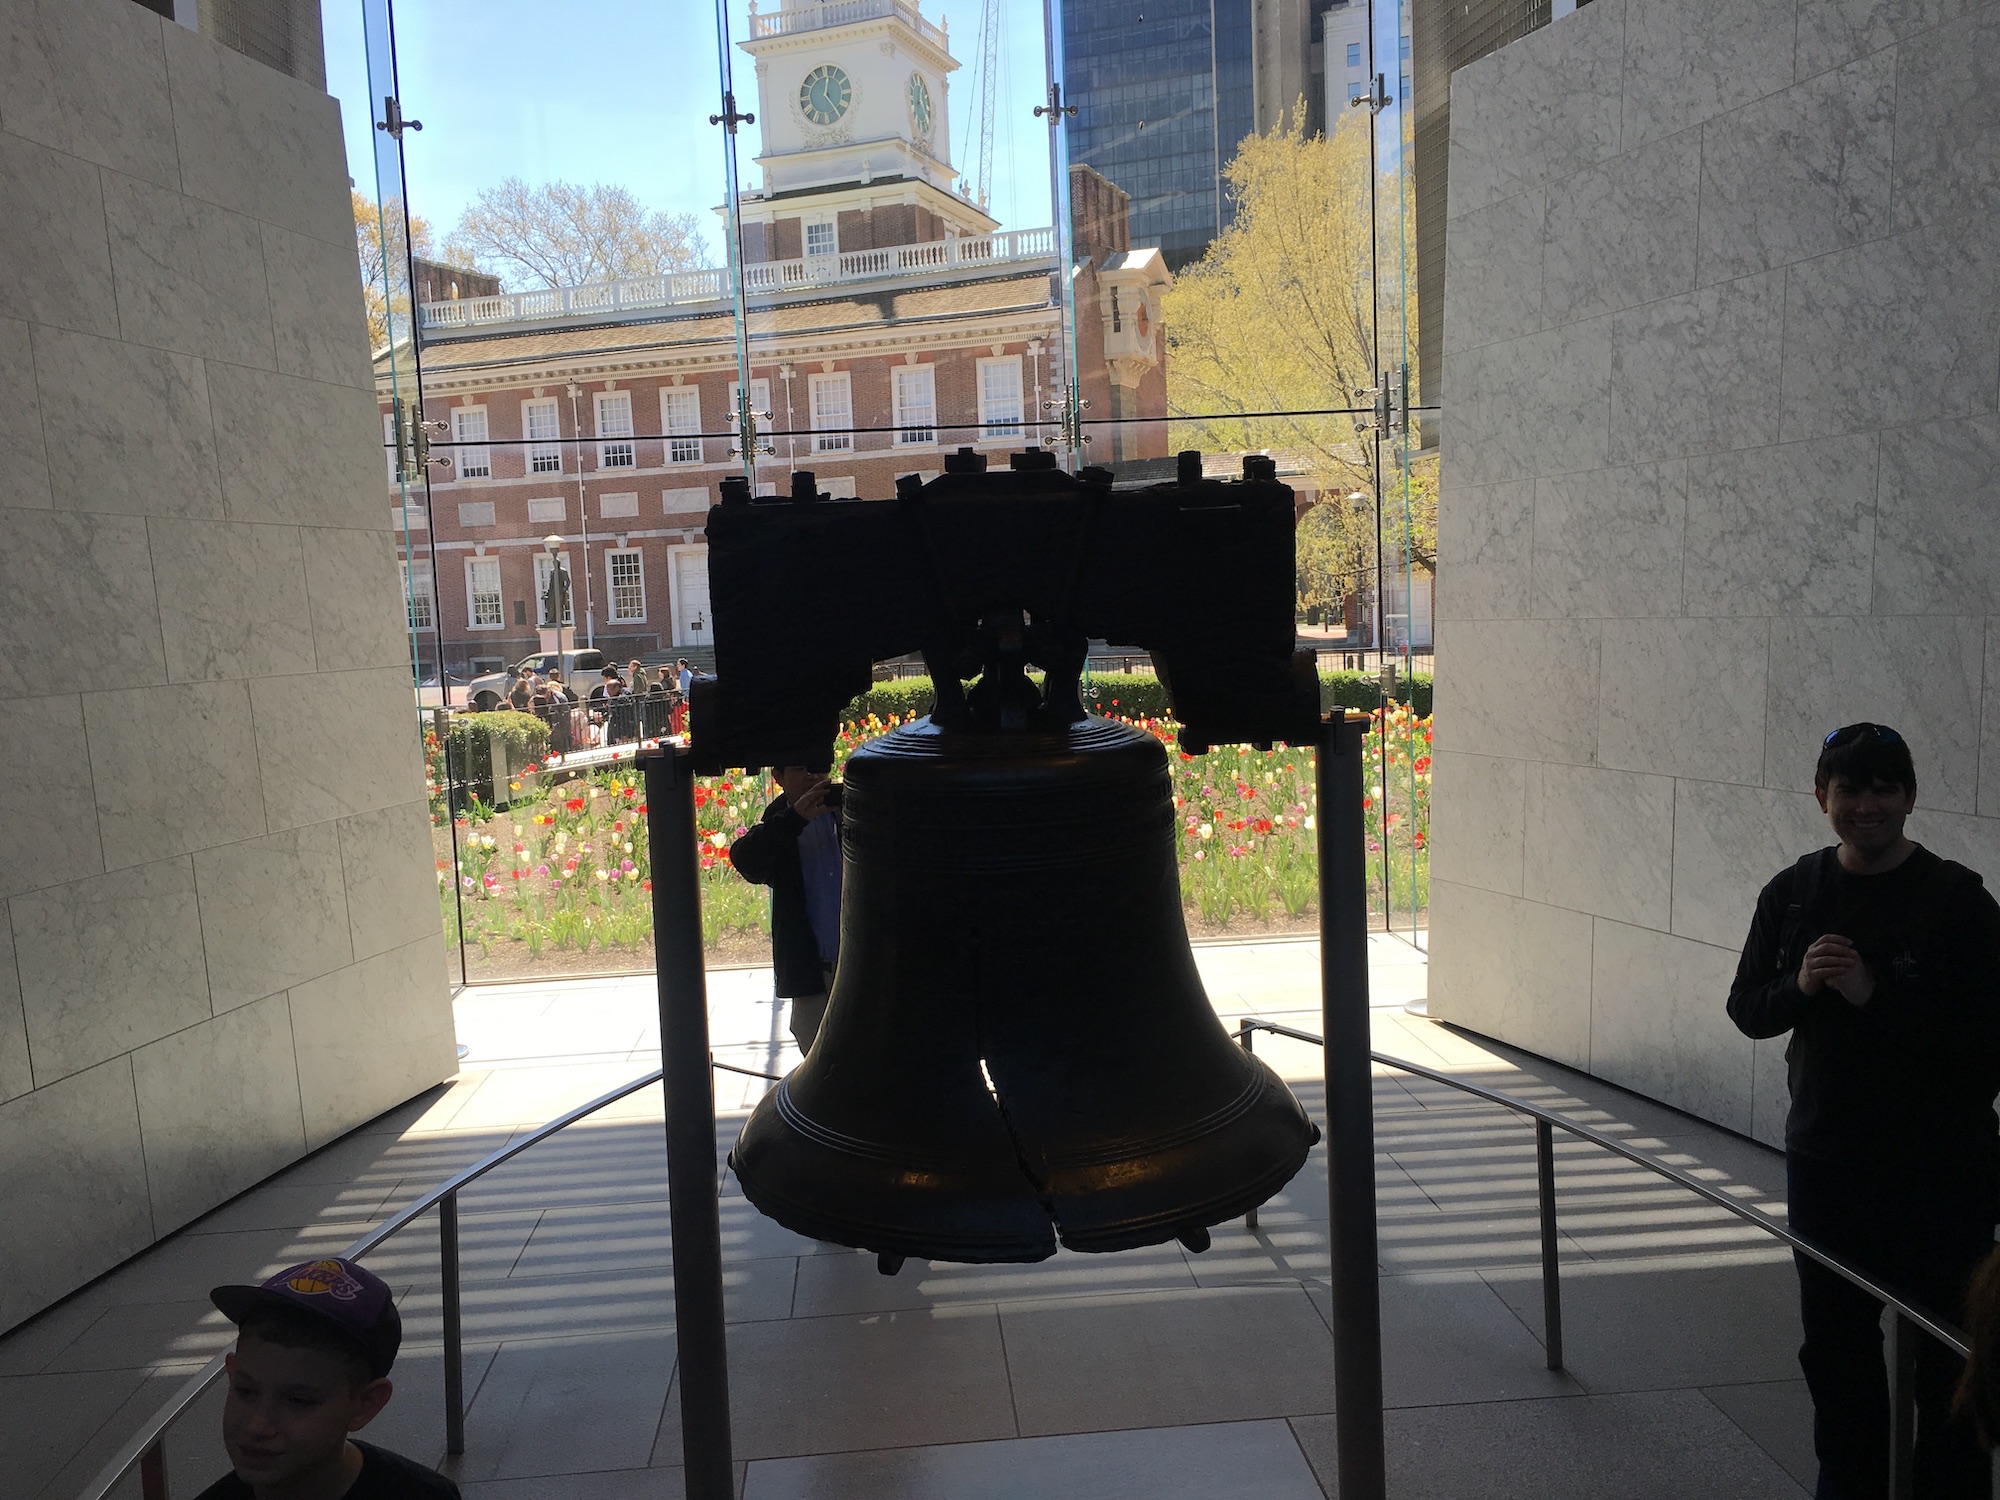 The Liberty Bell Crack